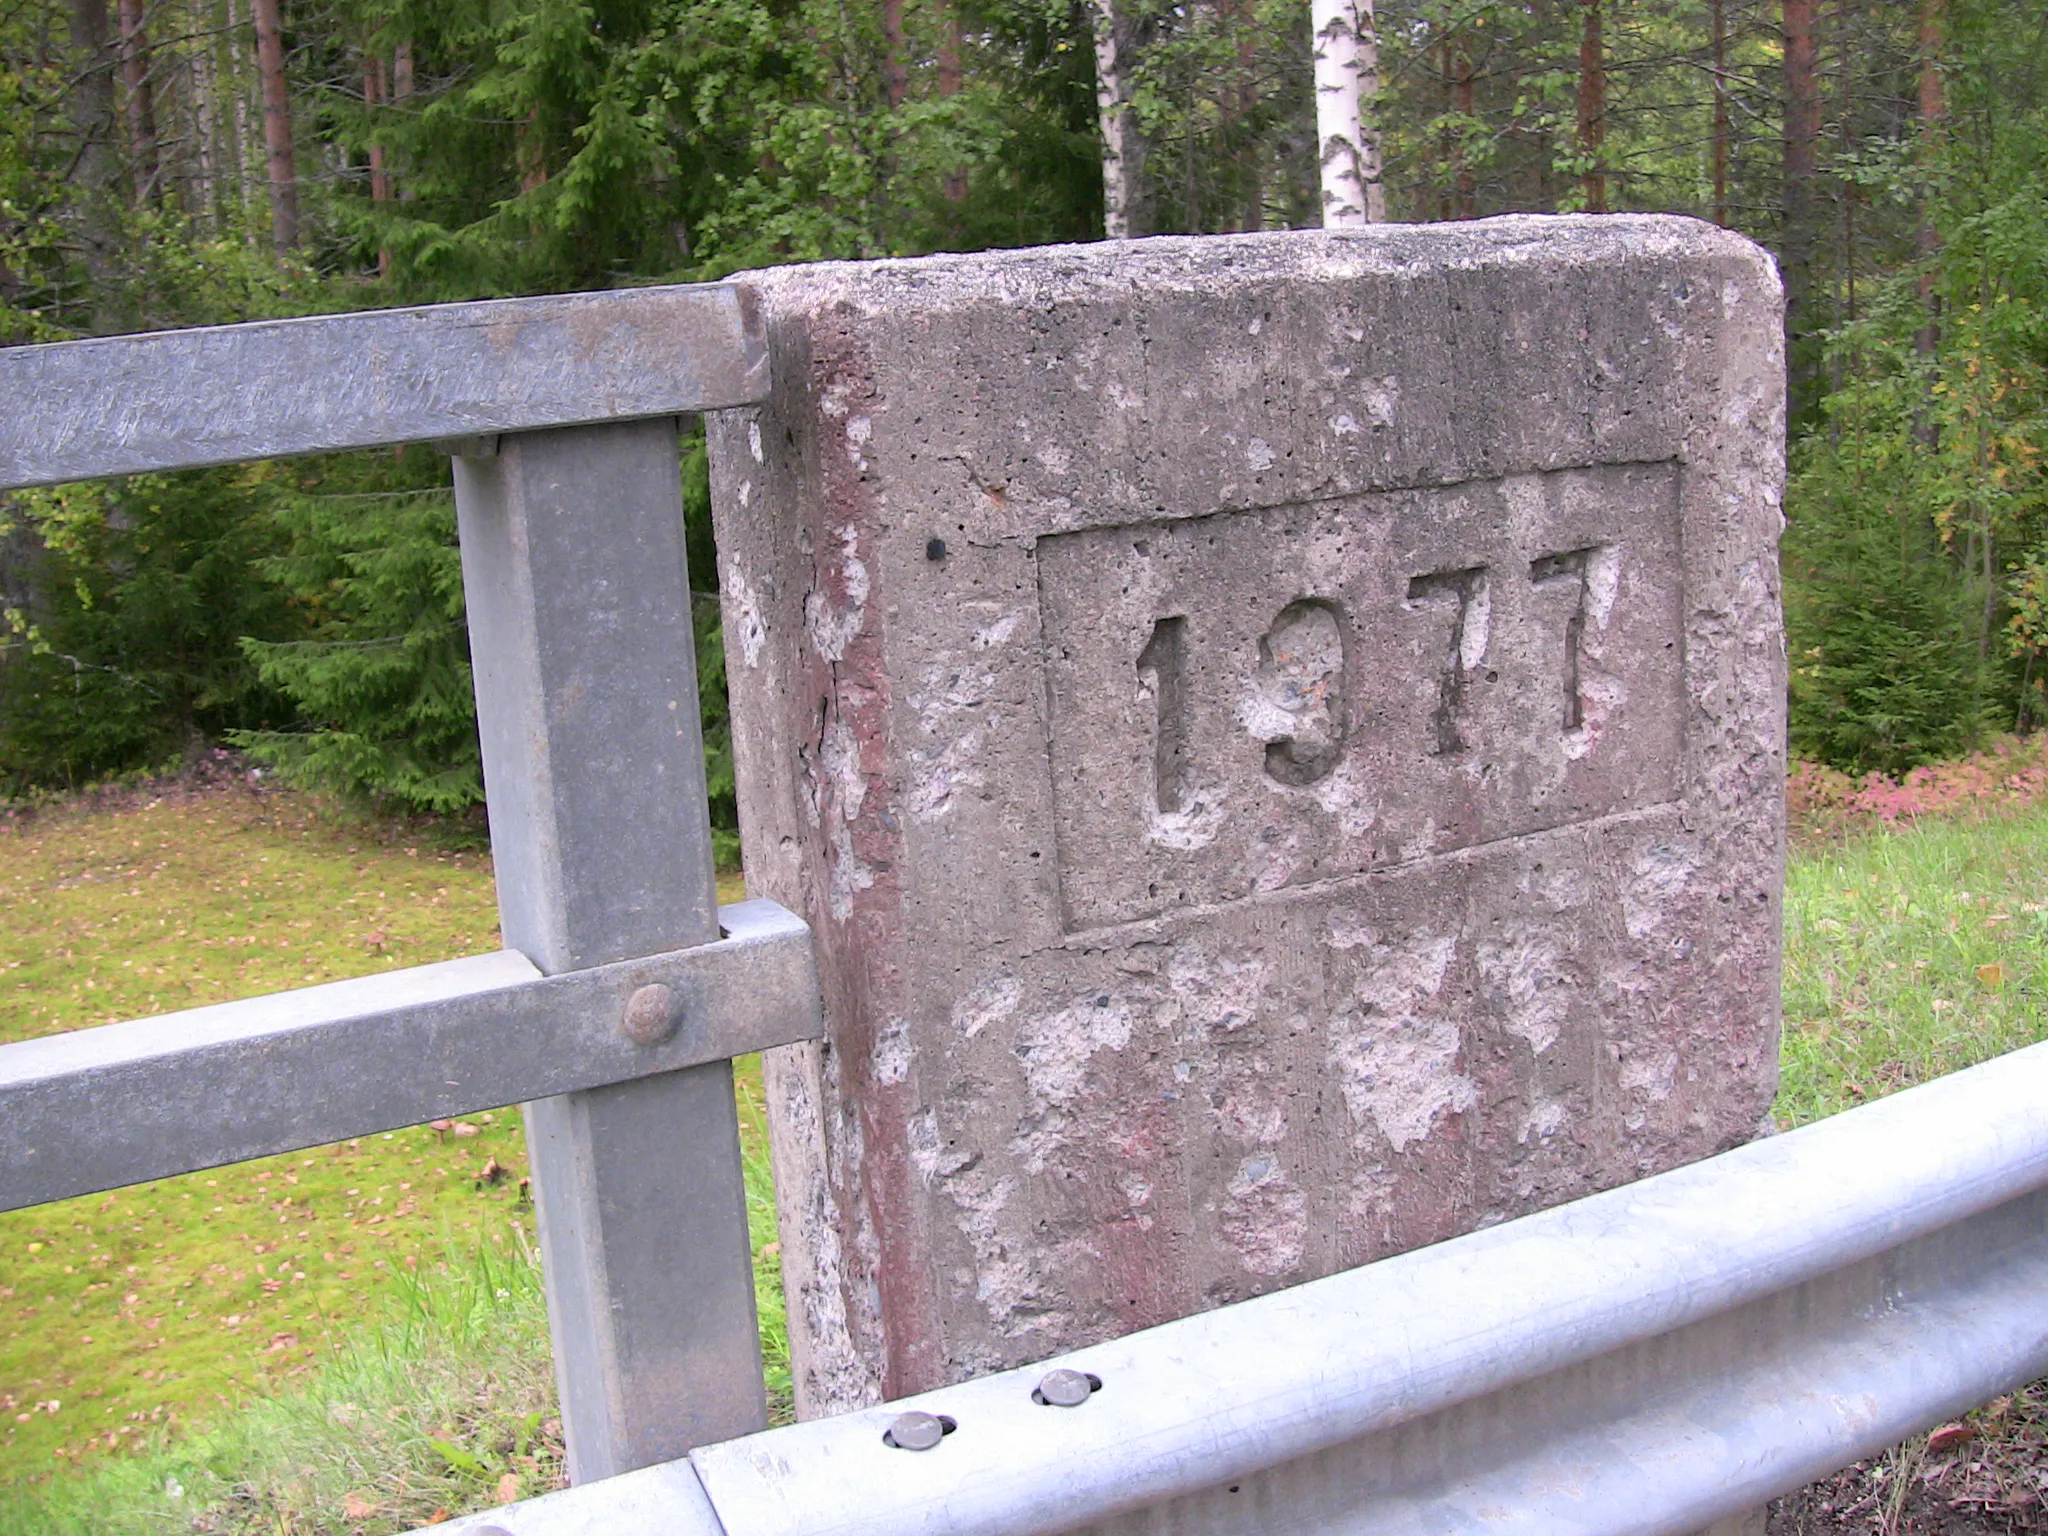 Photo showing: This is a photo of a monument in Finland identified by the URL https://fi.wikipedia.org/wiki/Lastukosken_kanava